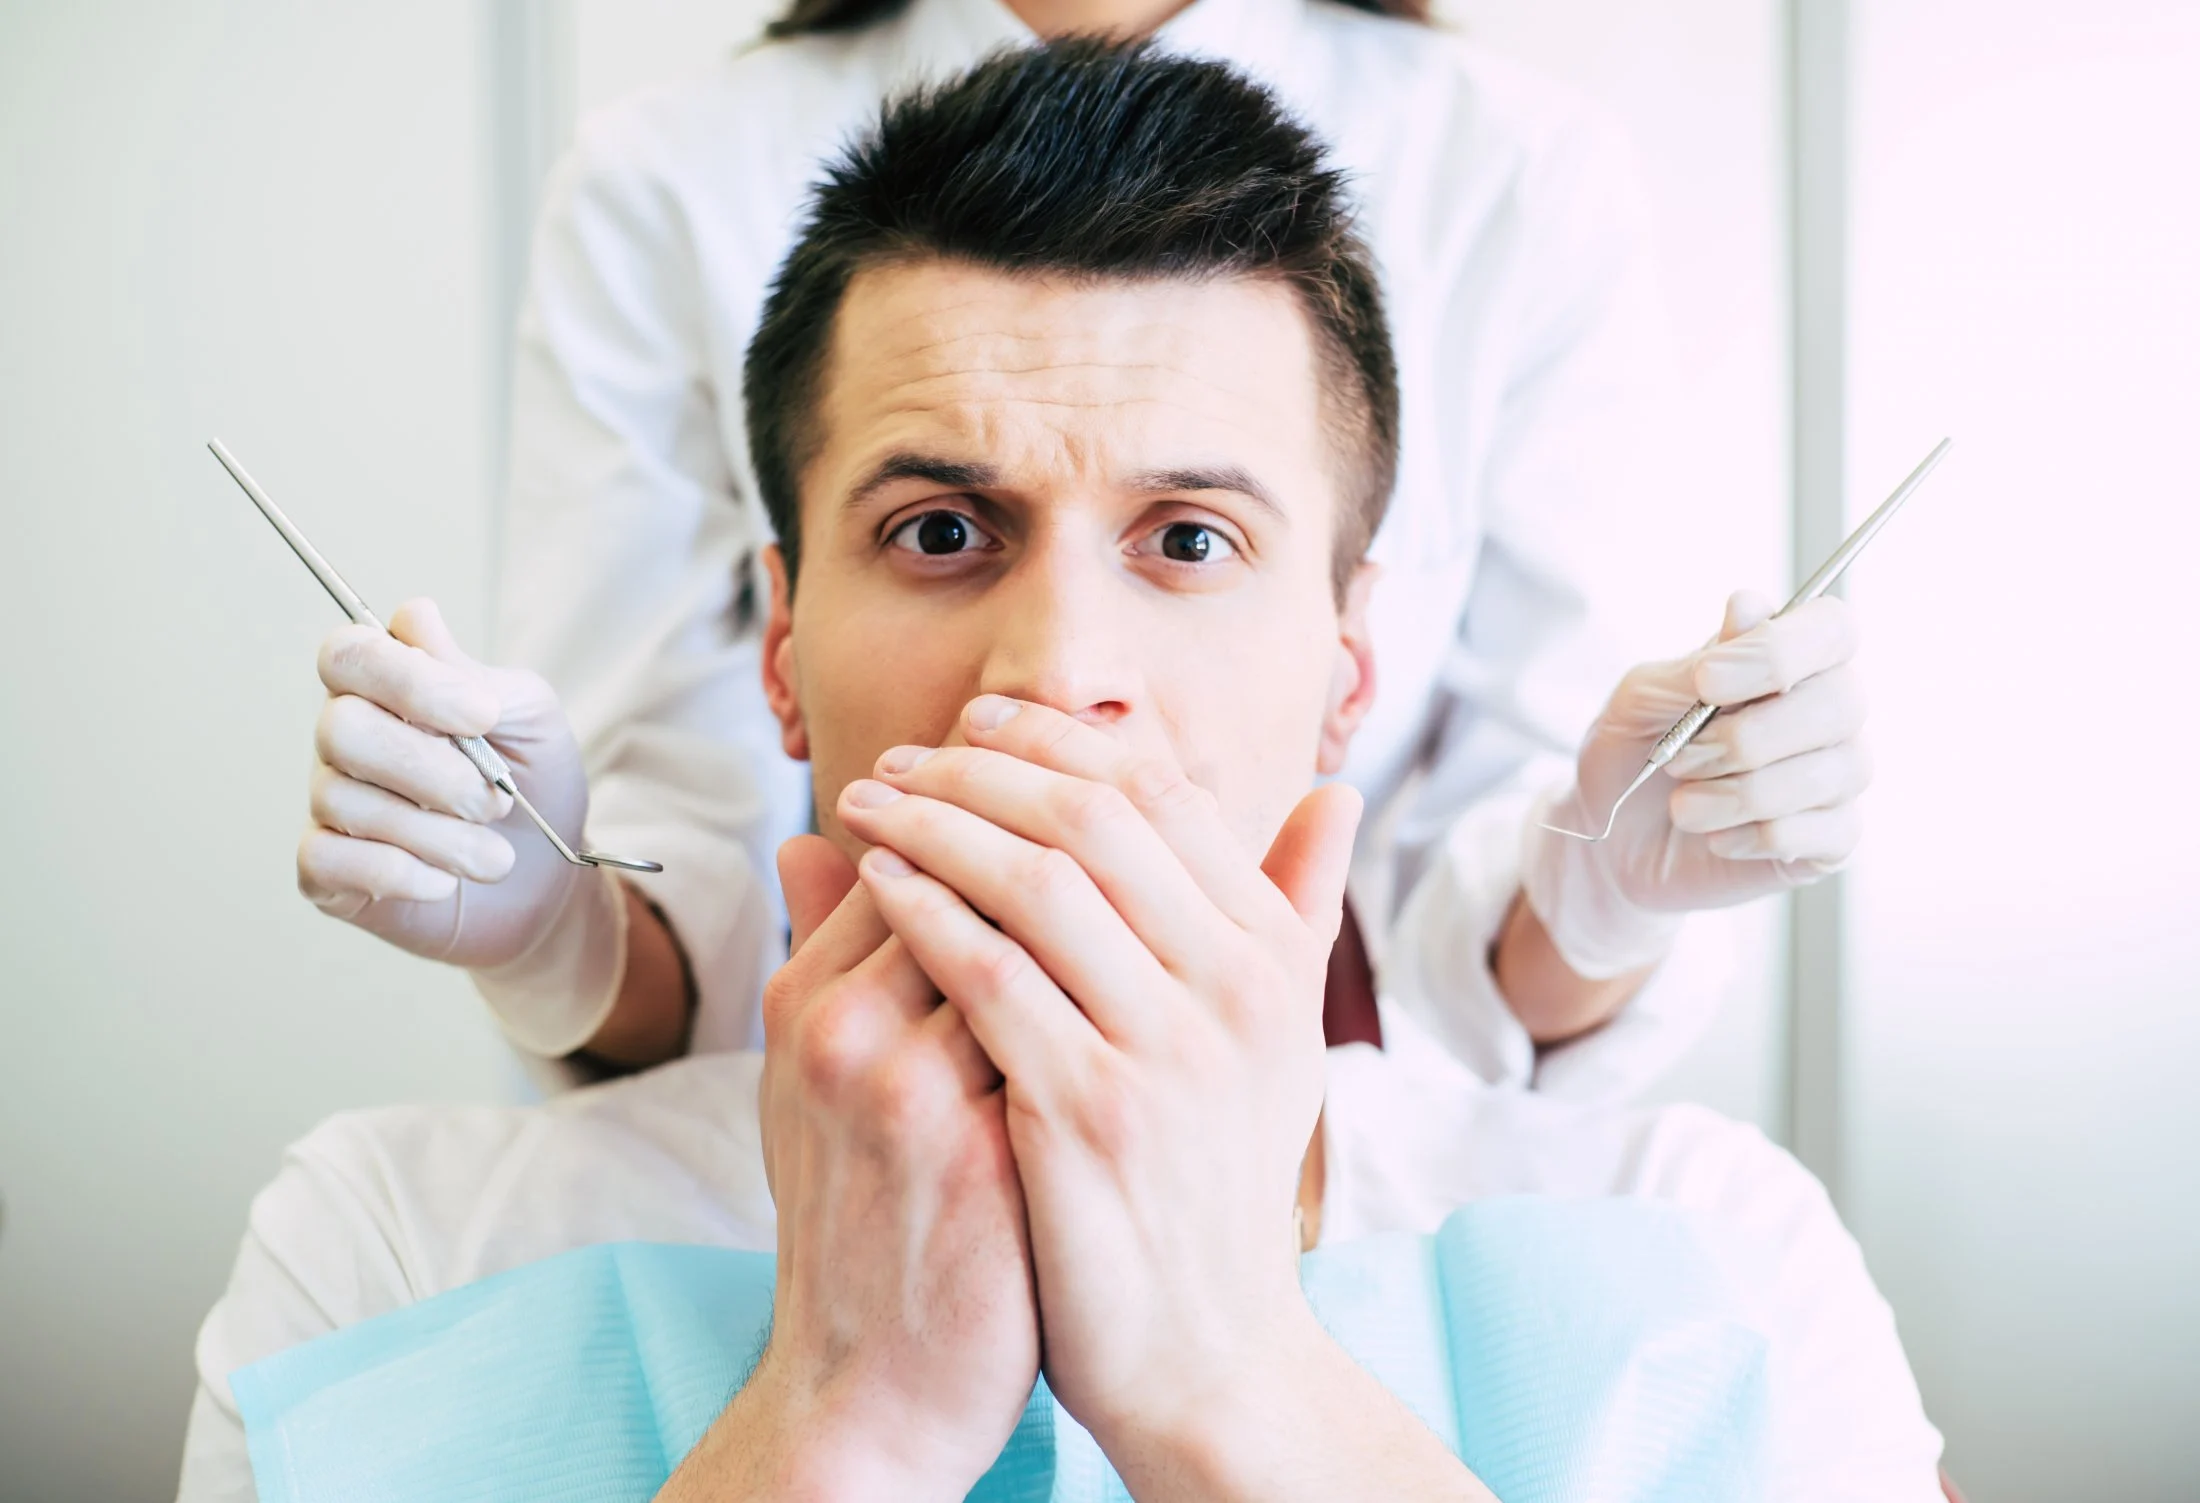 Featured image for “Find Out Who is at Risk for Dental Anxiety”